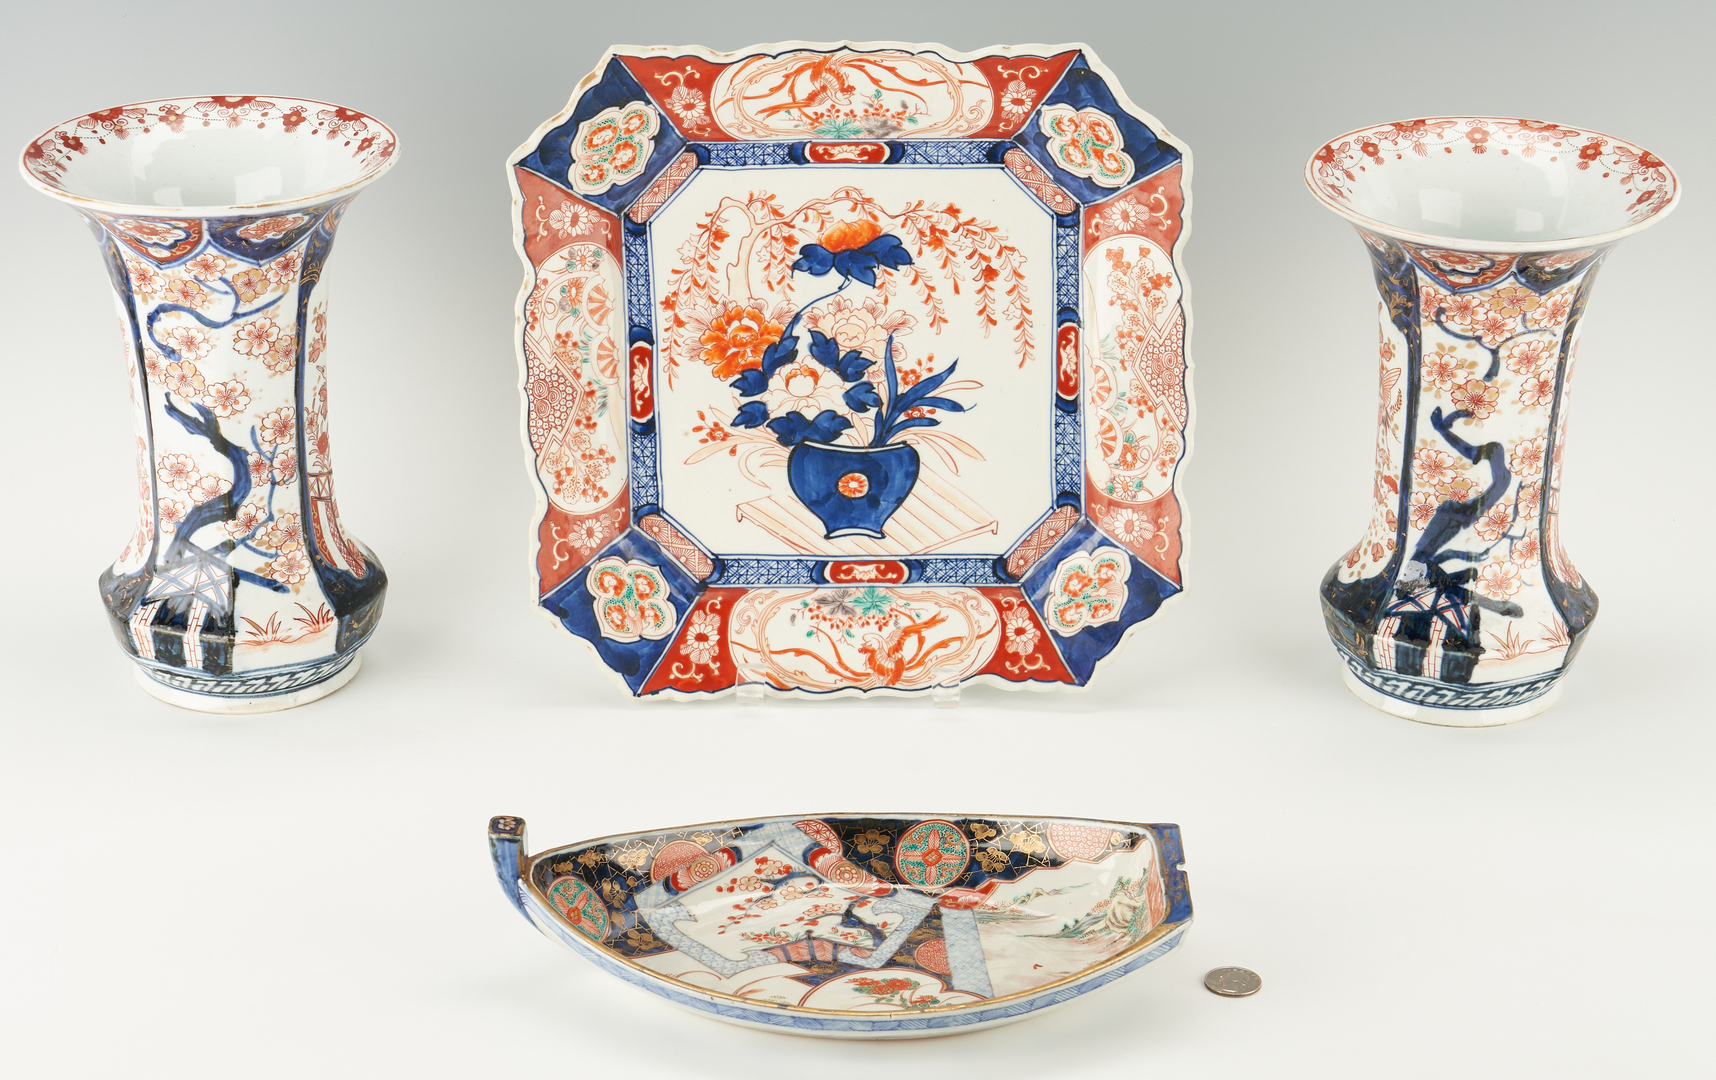 Lot 396: Pair of Imari Porcelain Vases, Boat and Square Dishes